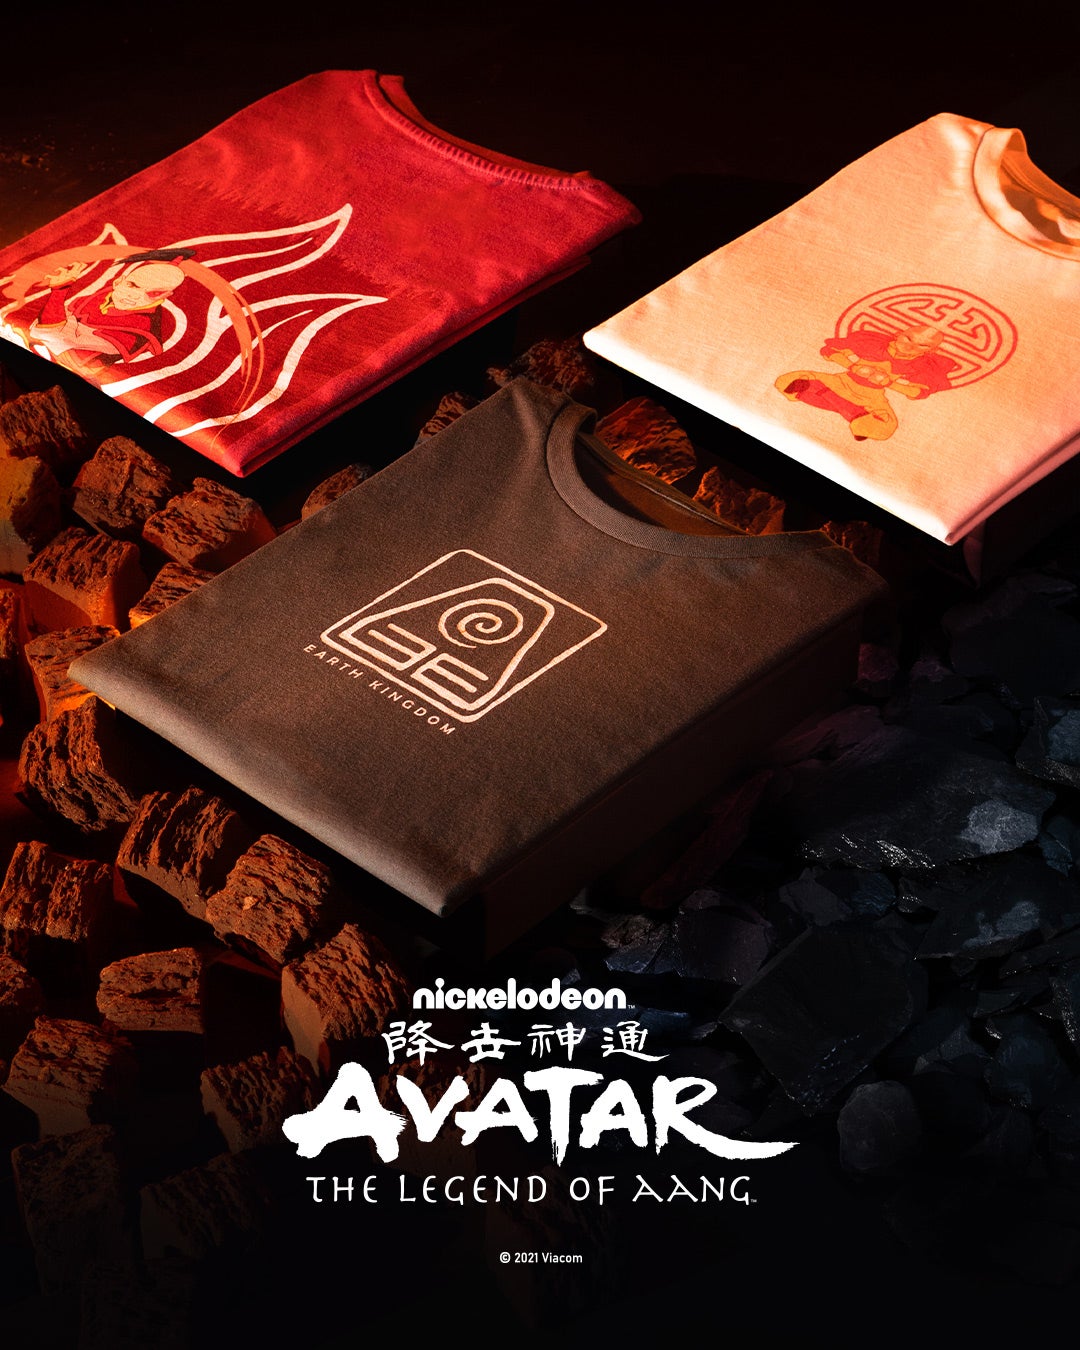 OFFICIAL Avatar The Last Airbender TShirts and Merchandise  BoxLunch